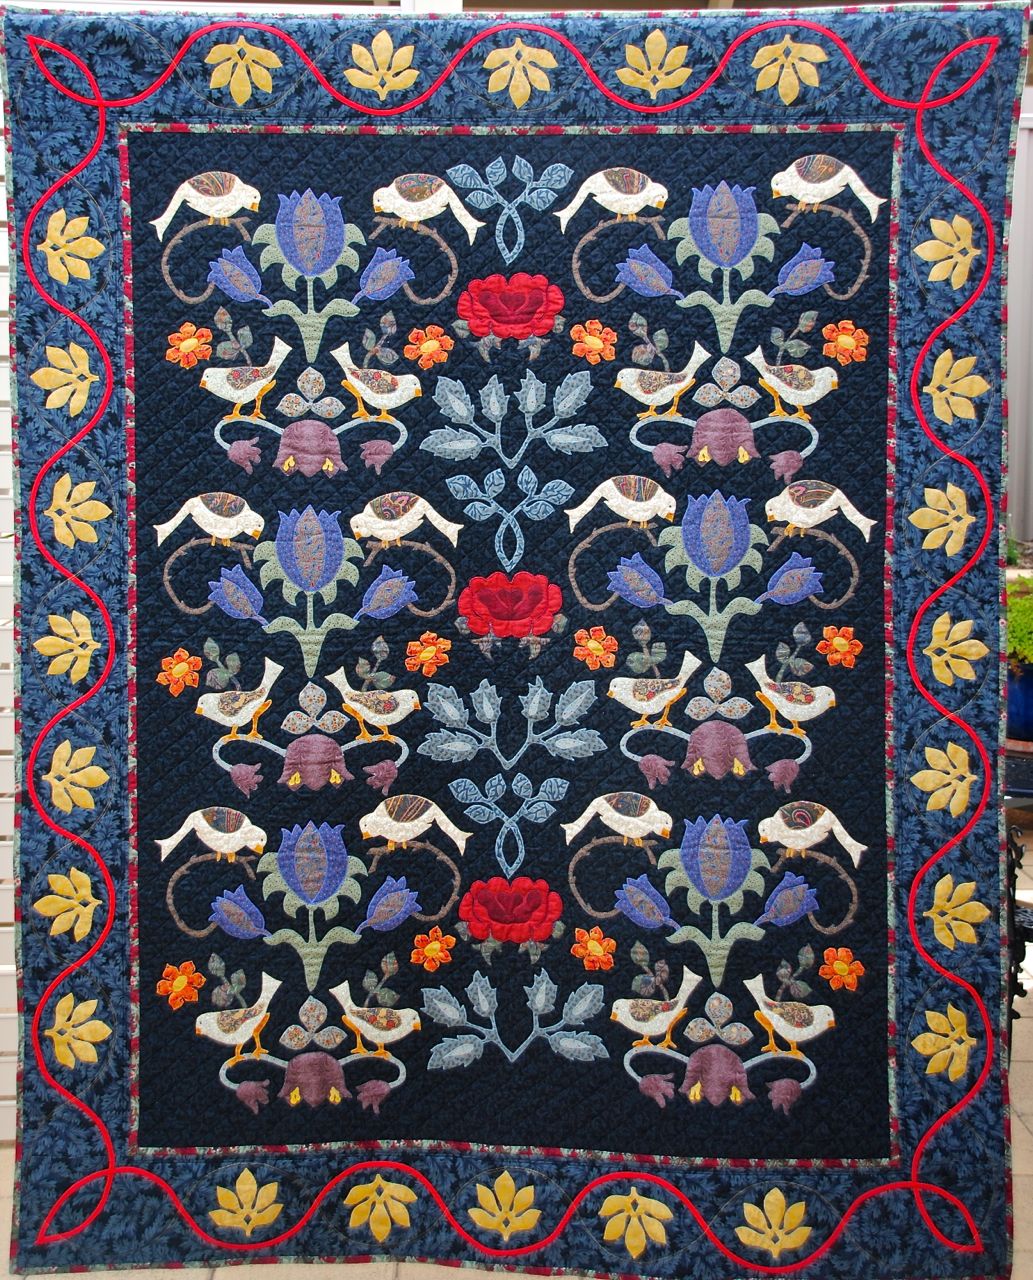 William Morris in Quilting: Quilt Gallery and Patterns